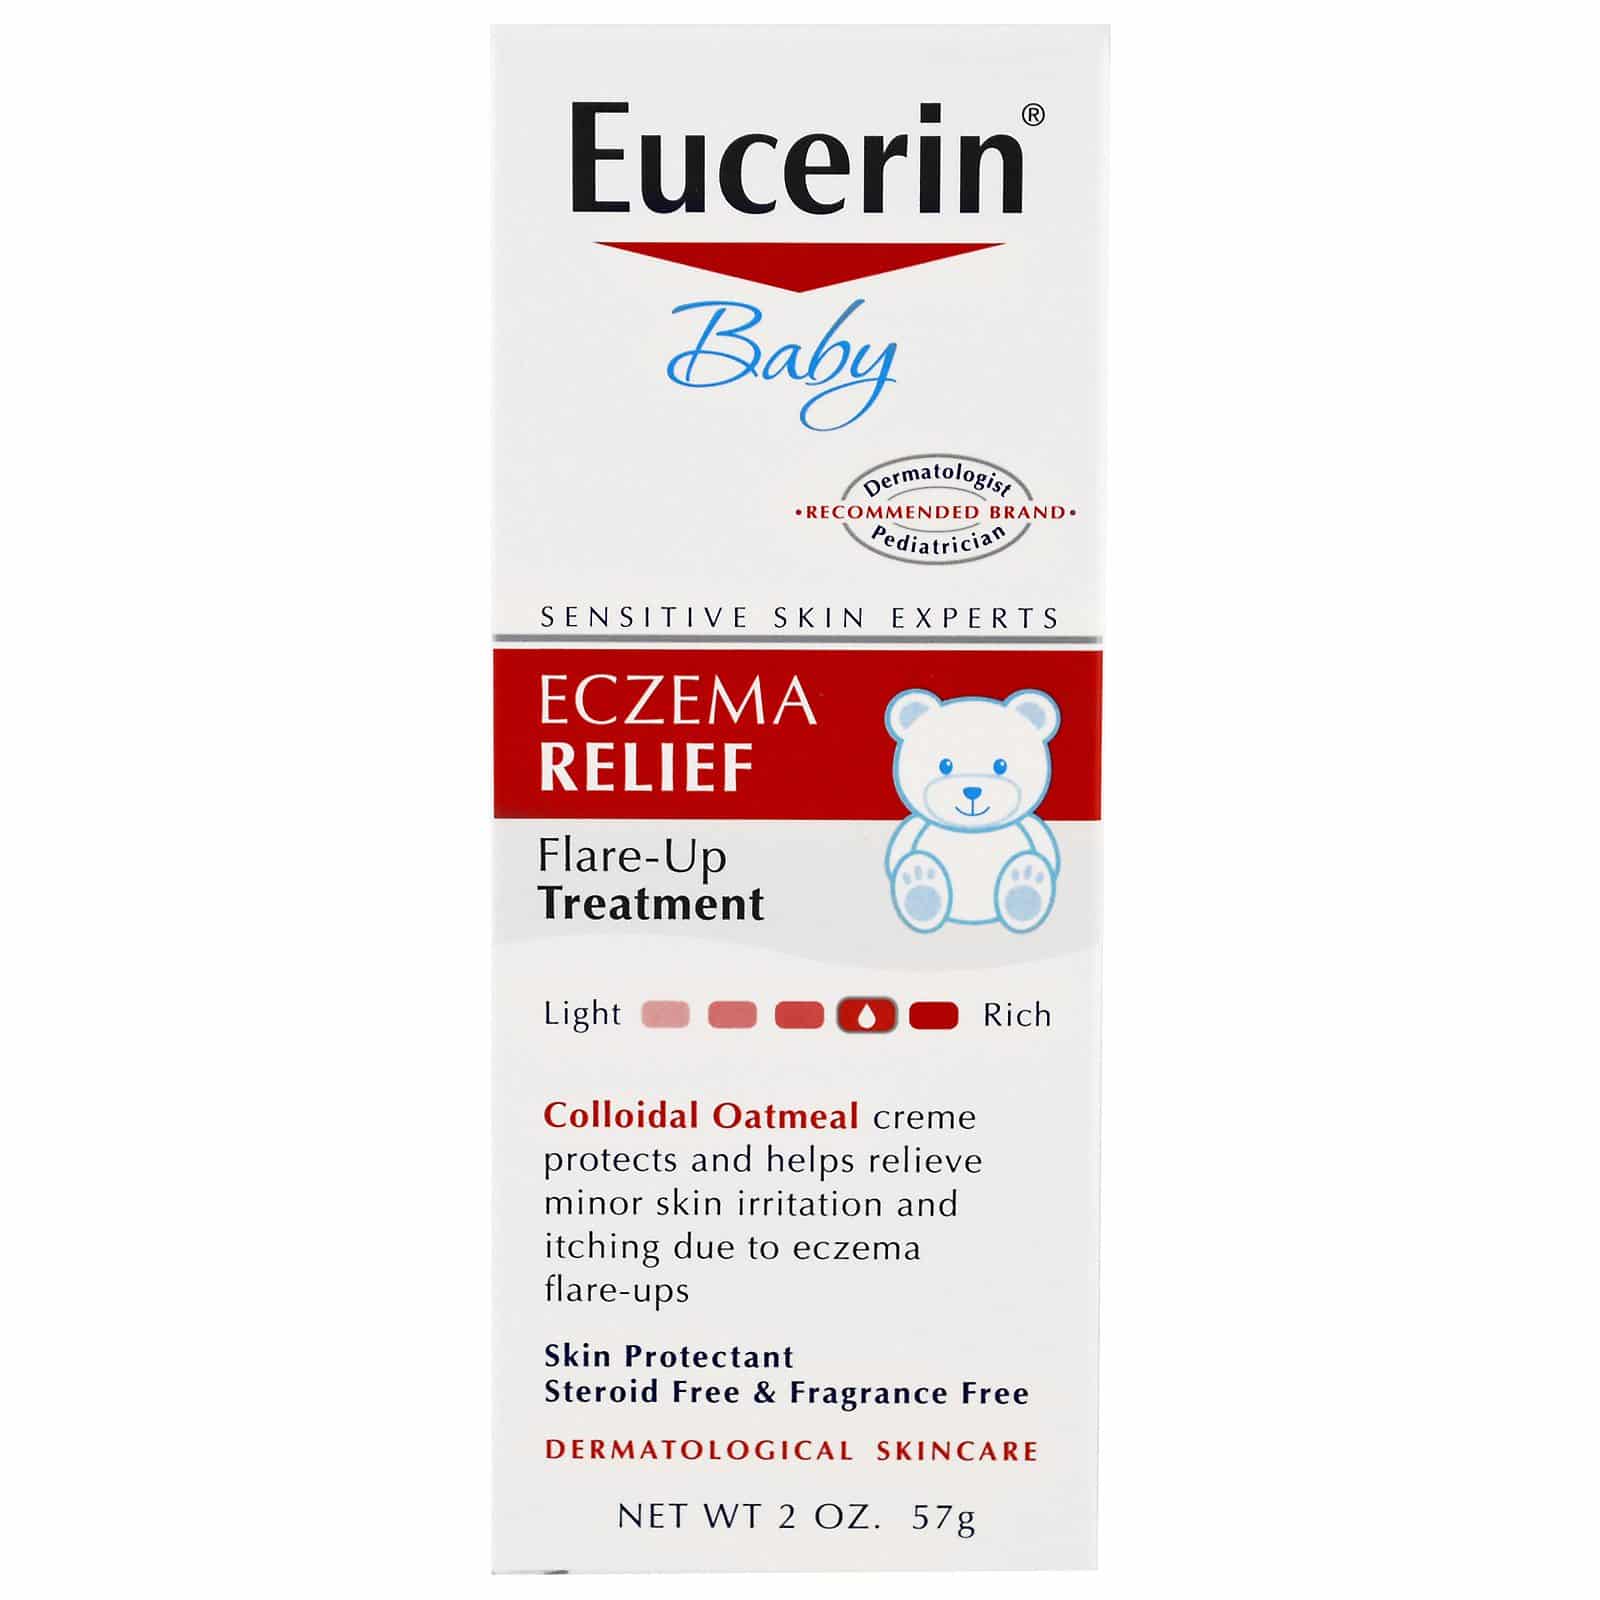 [Clearance Exp. 10/22] Eucerin Baby Eczema Relief Flare